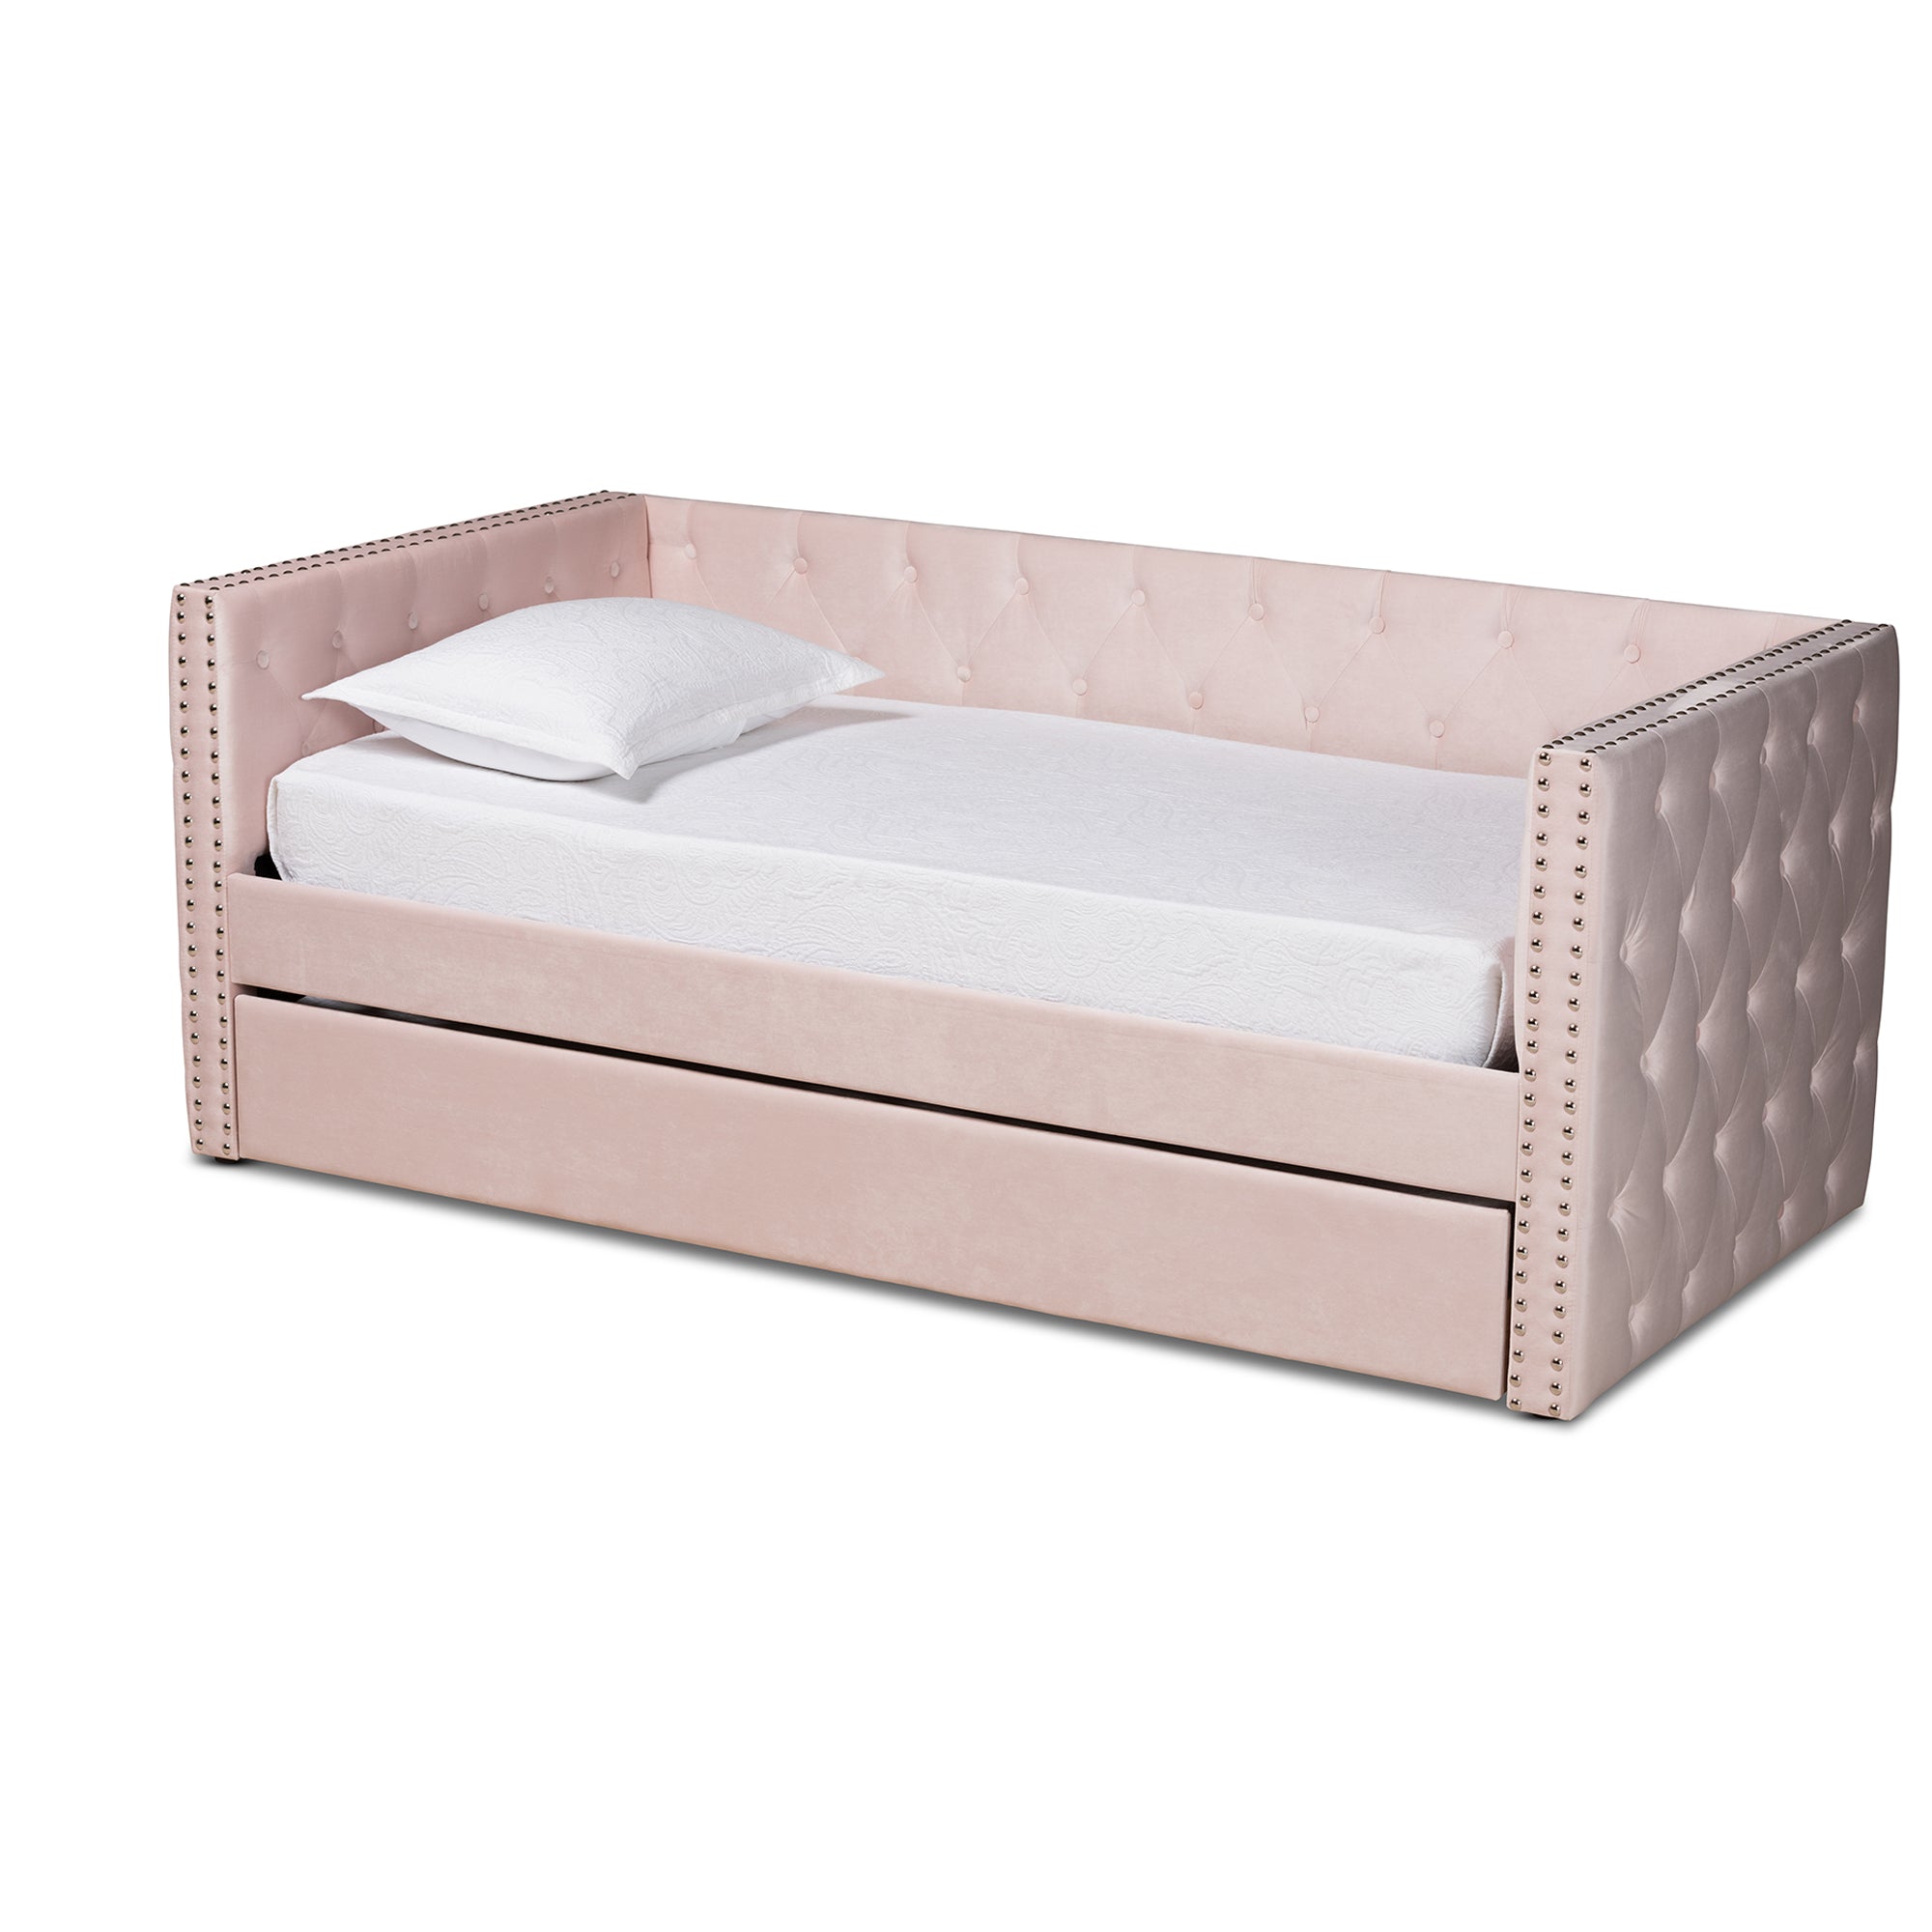 Larkin Contemporary Daybed with Trundle-Daybed & Trundle-Baxton Studio - WI-Wall2Wall Furnishings